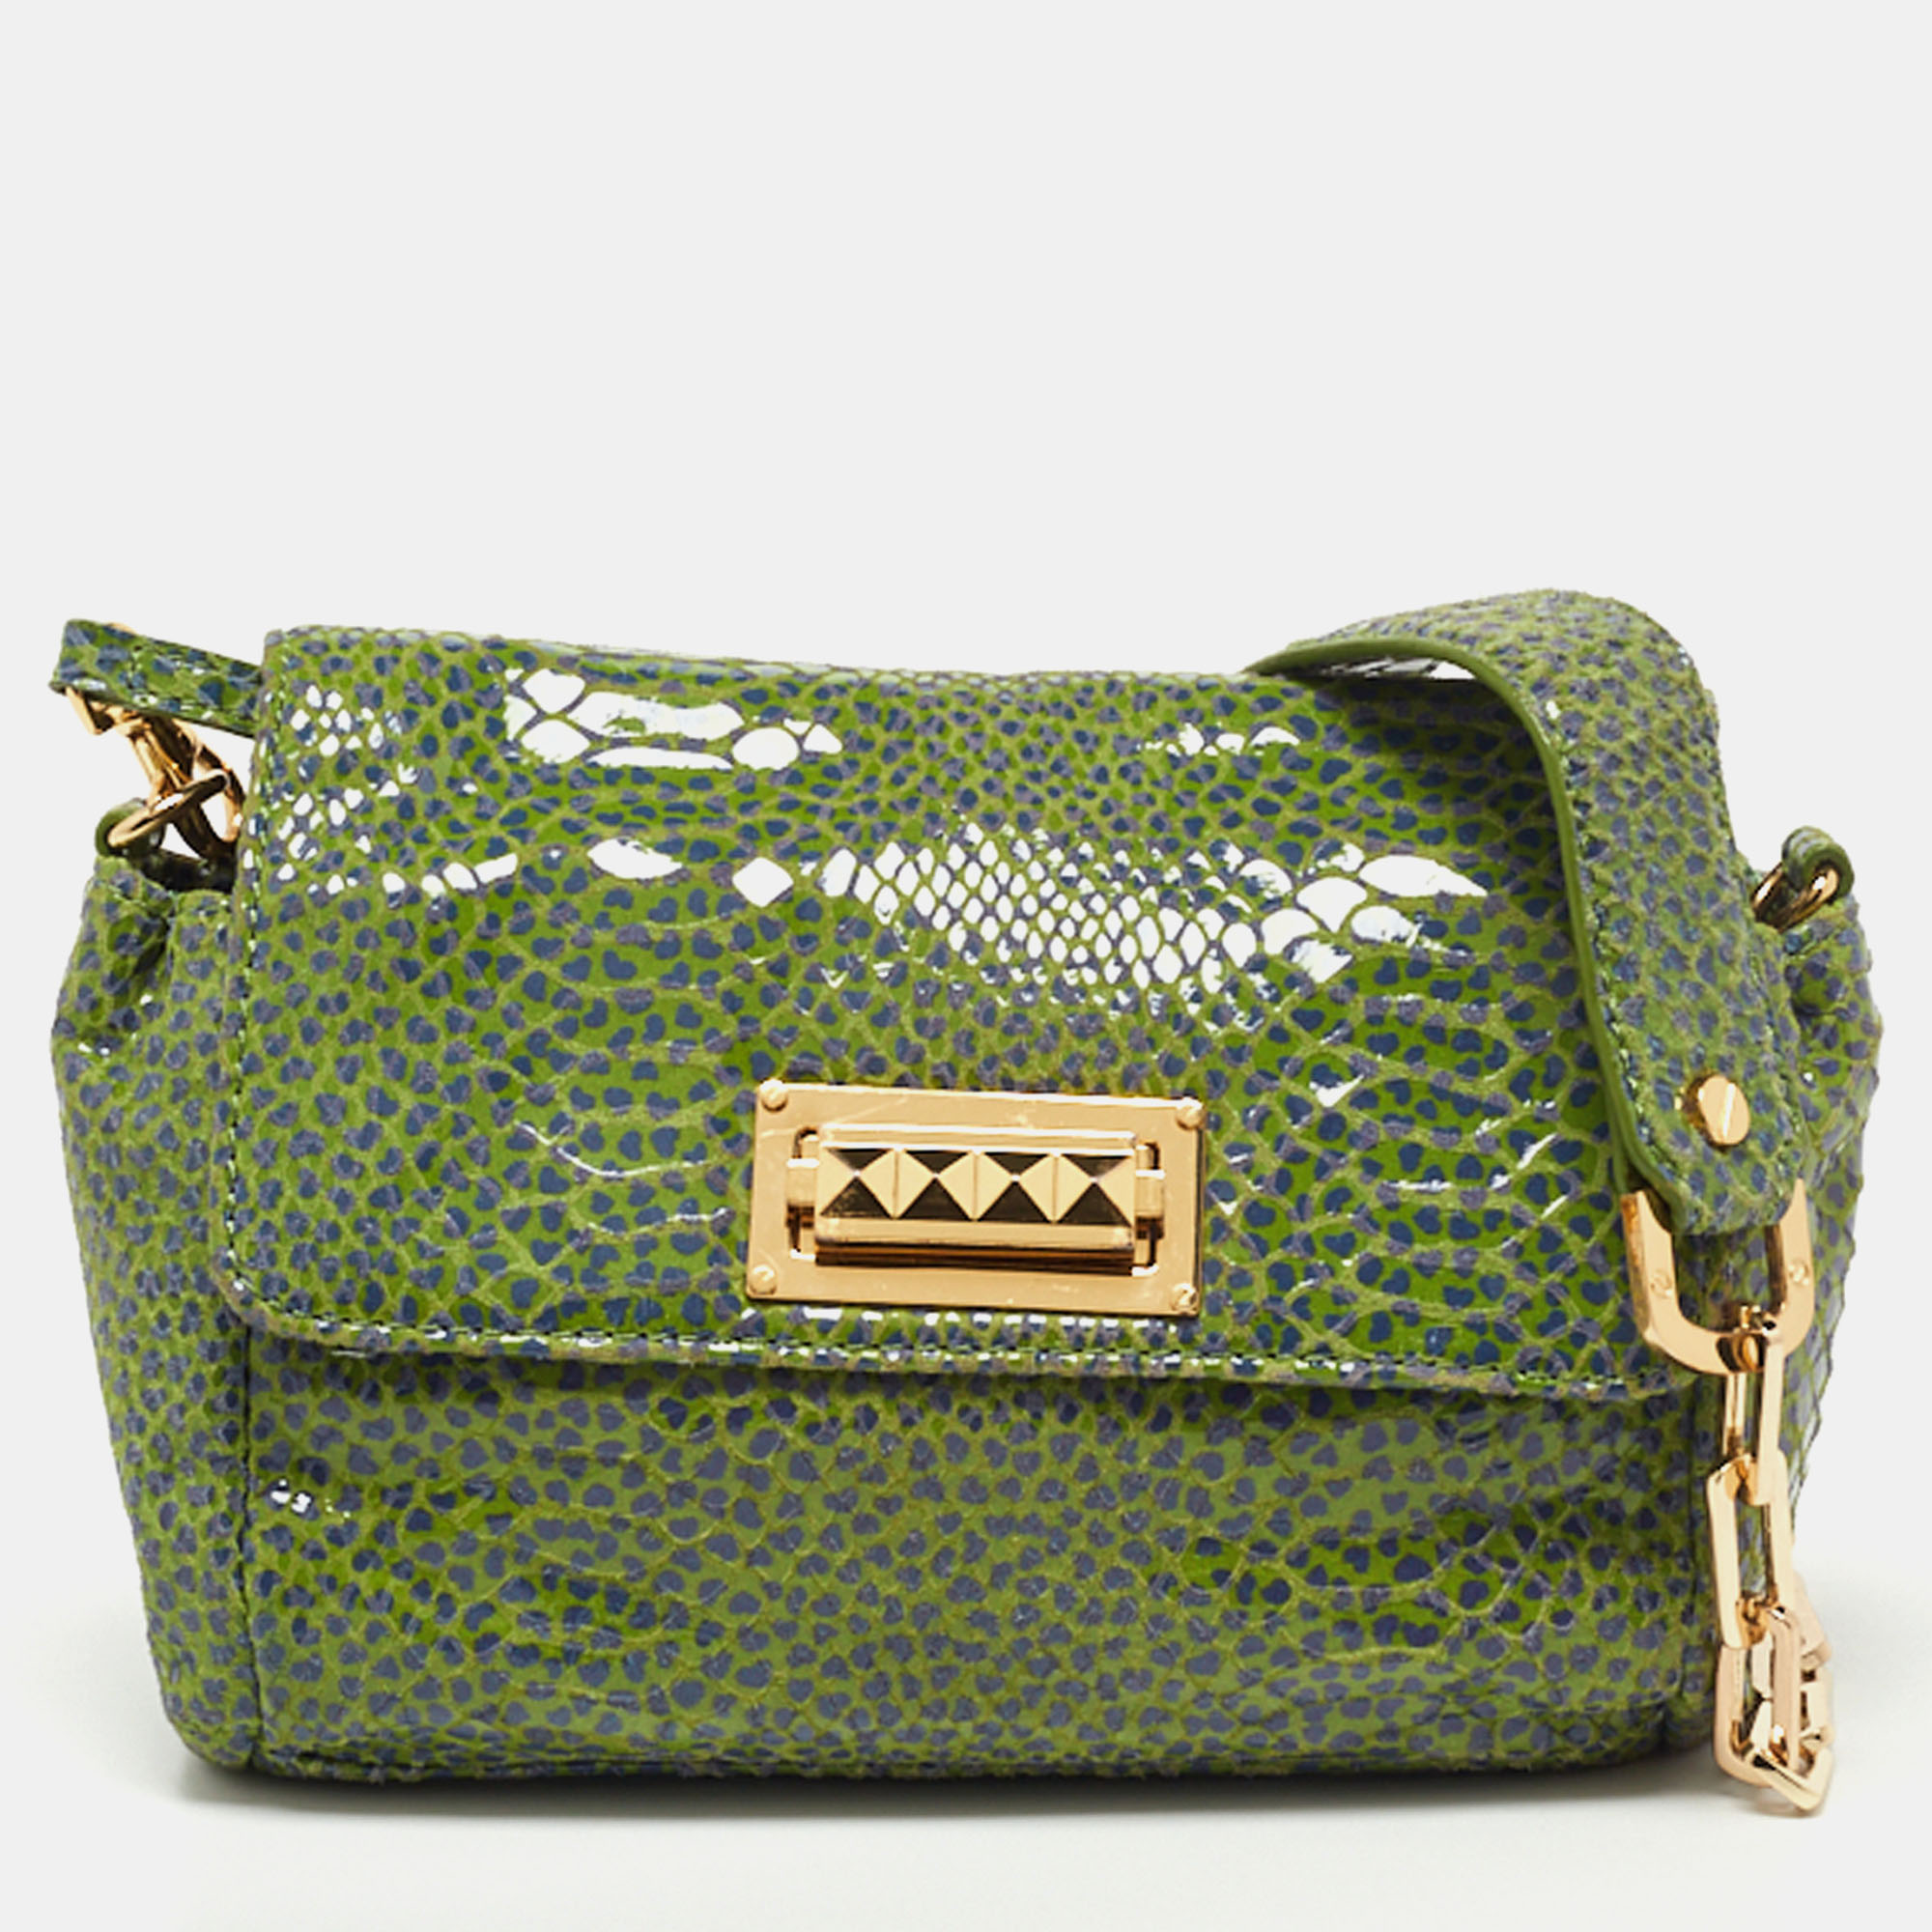 This shoulder bag from the House of Tory Burch offers eternal style luxury and functionality. It is crafted using green blue python printed leather on the exterior and exhibits a fabric lined interior and gold tone hardware. This bag is the perfect accessory to own.